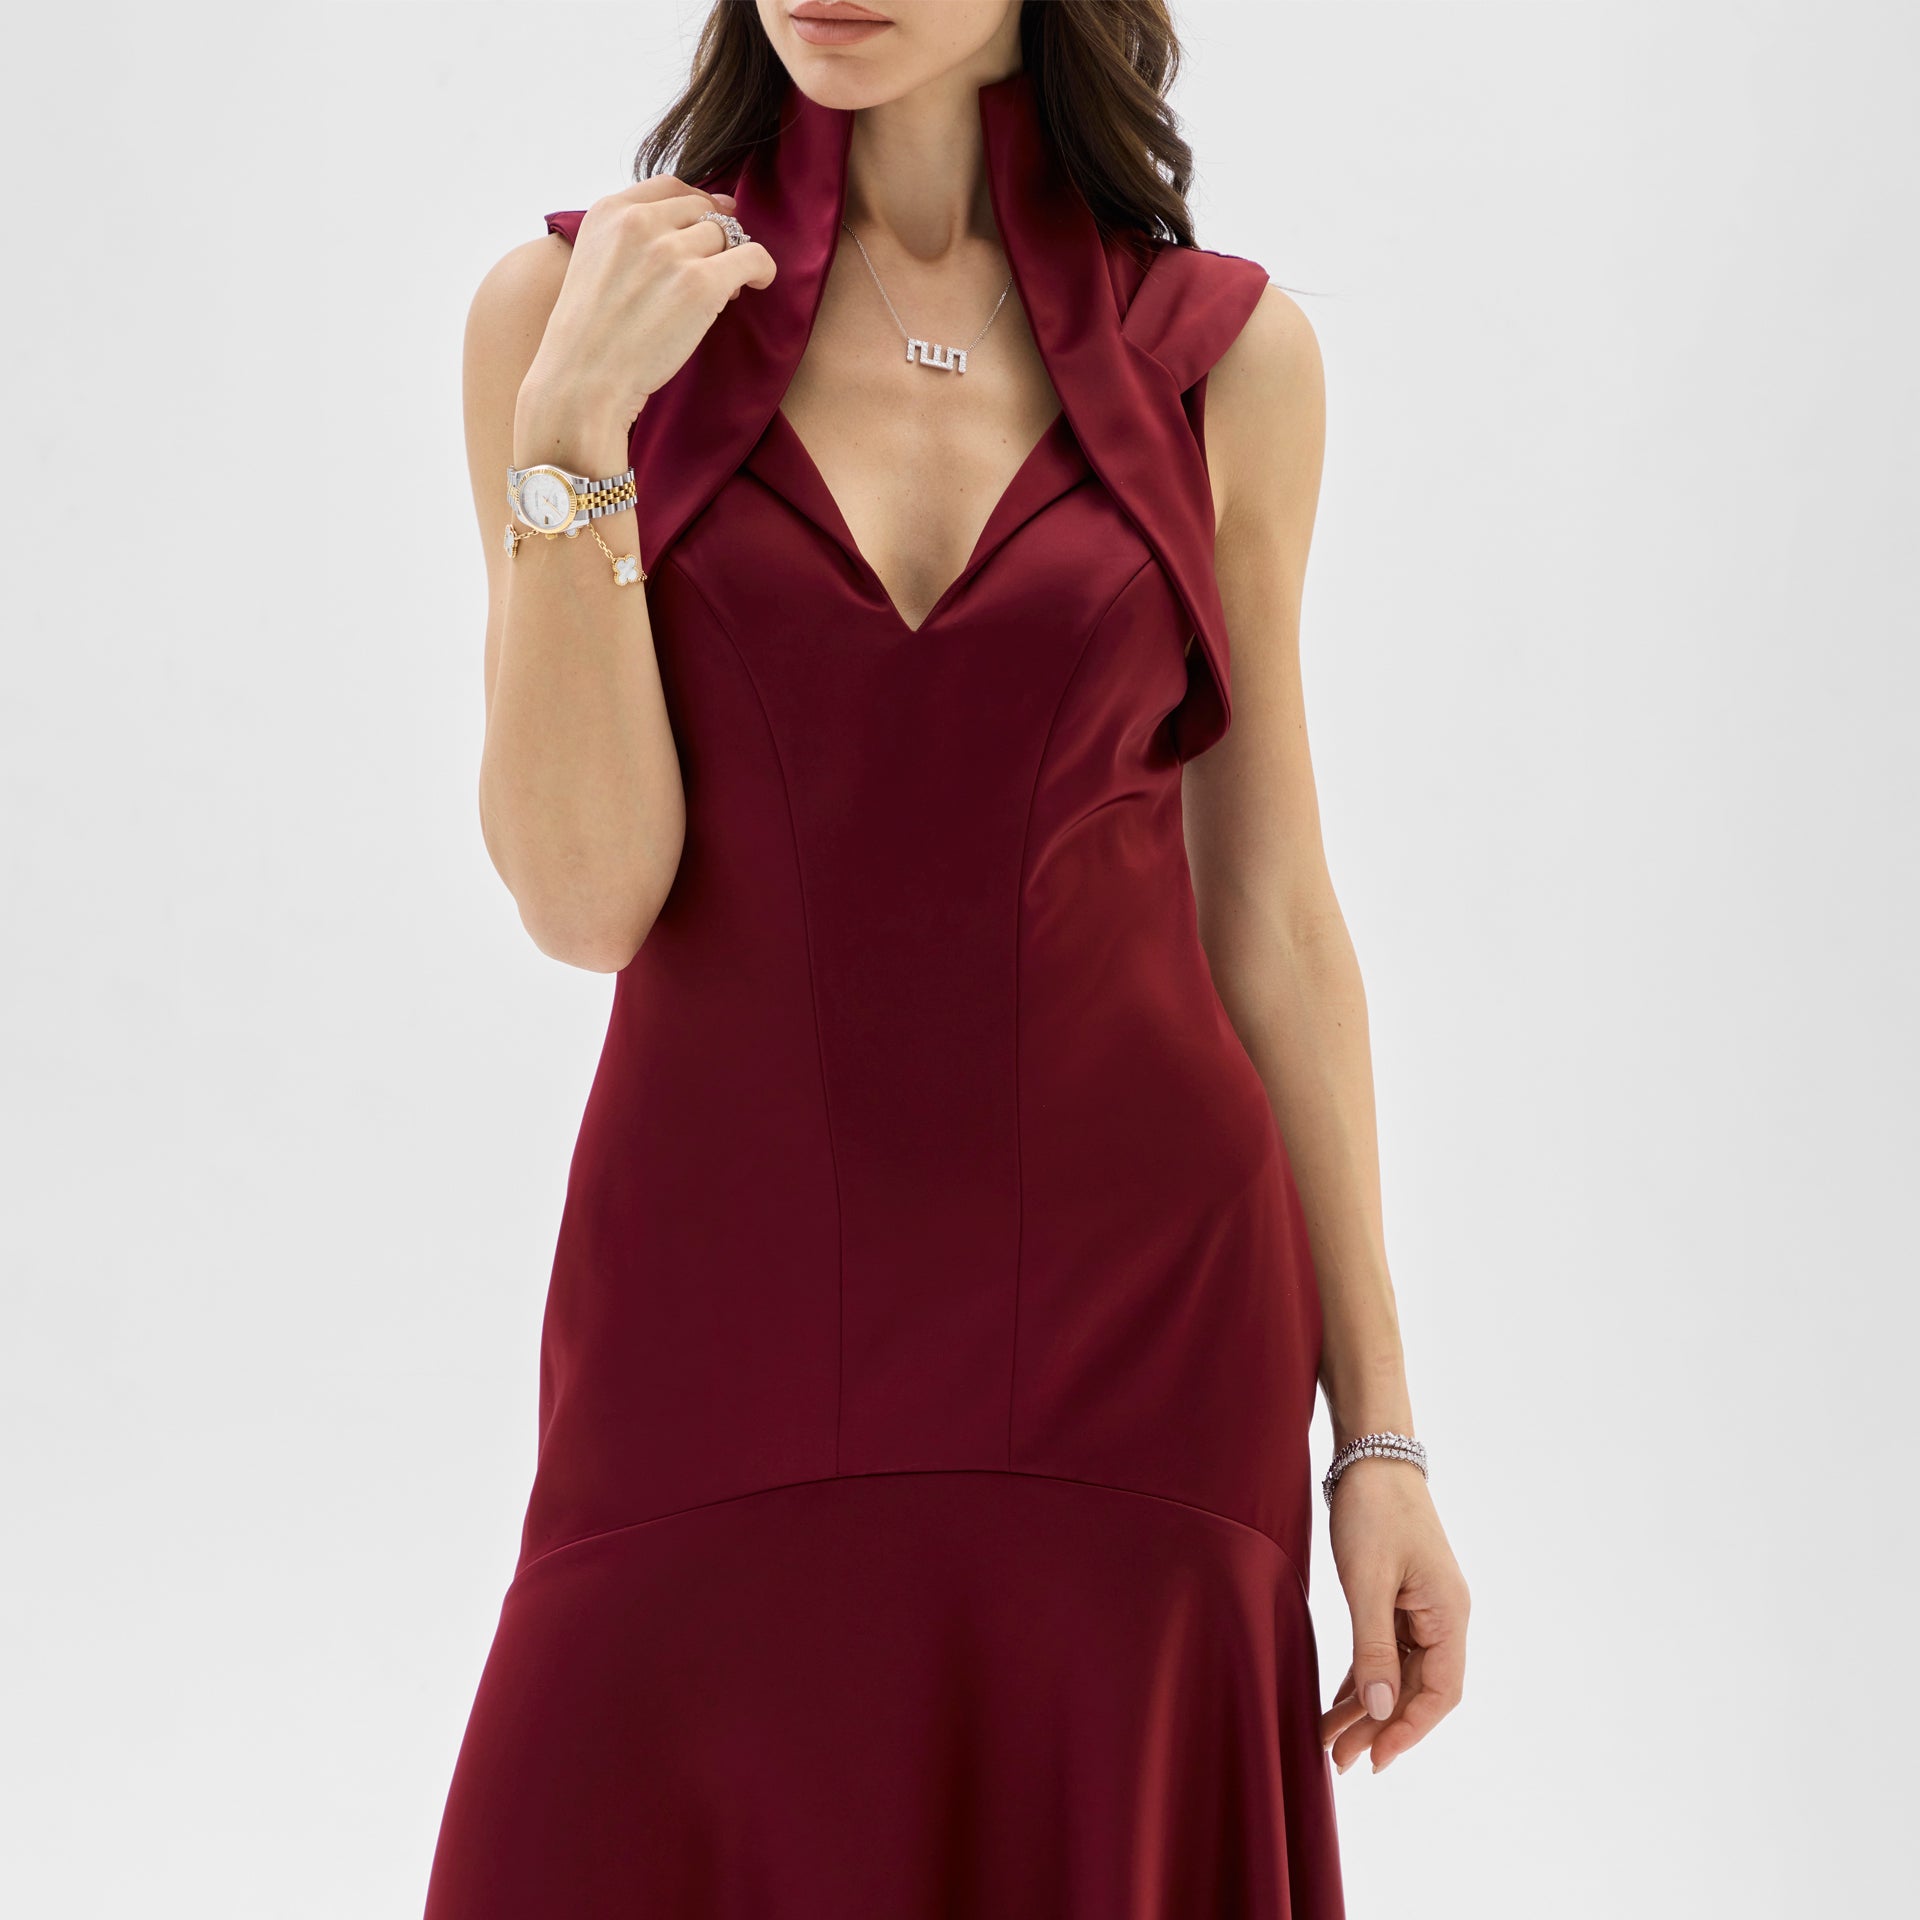 Maroon Satin Crepe Dress With Wide Skirt By Armoire